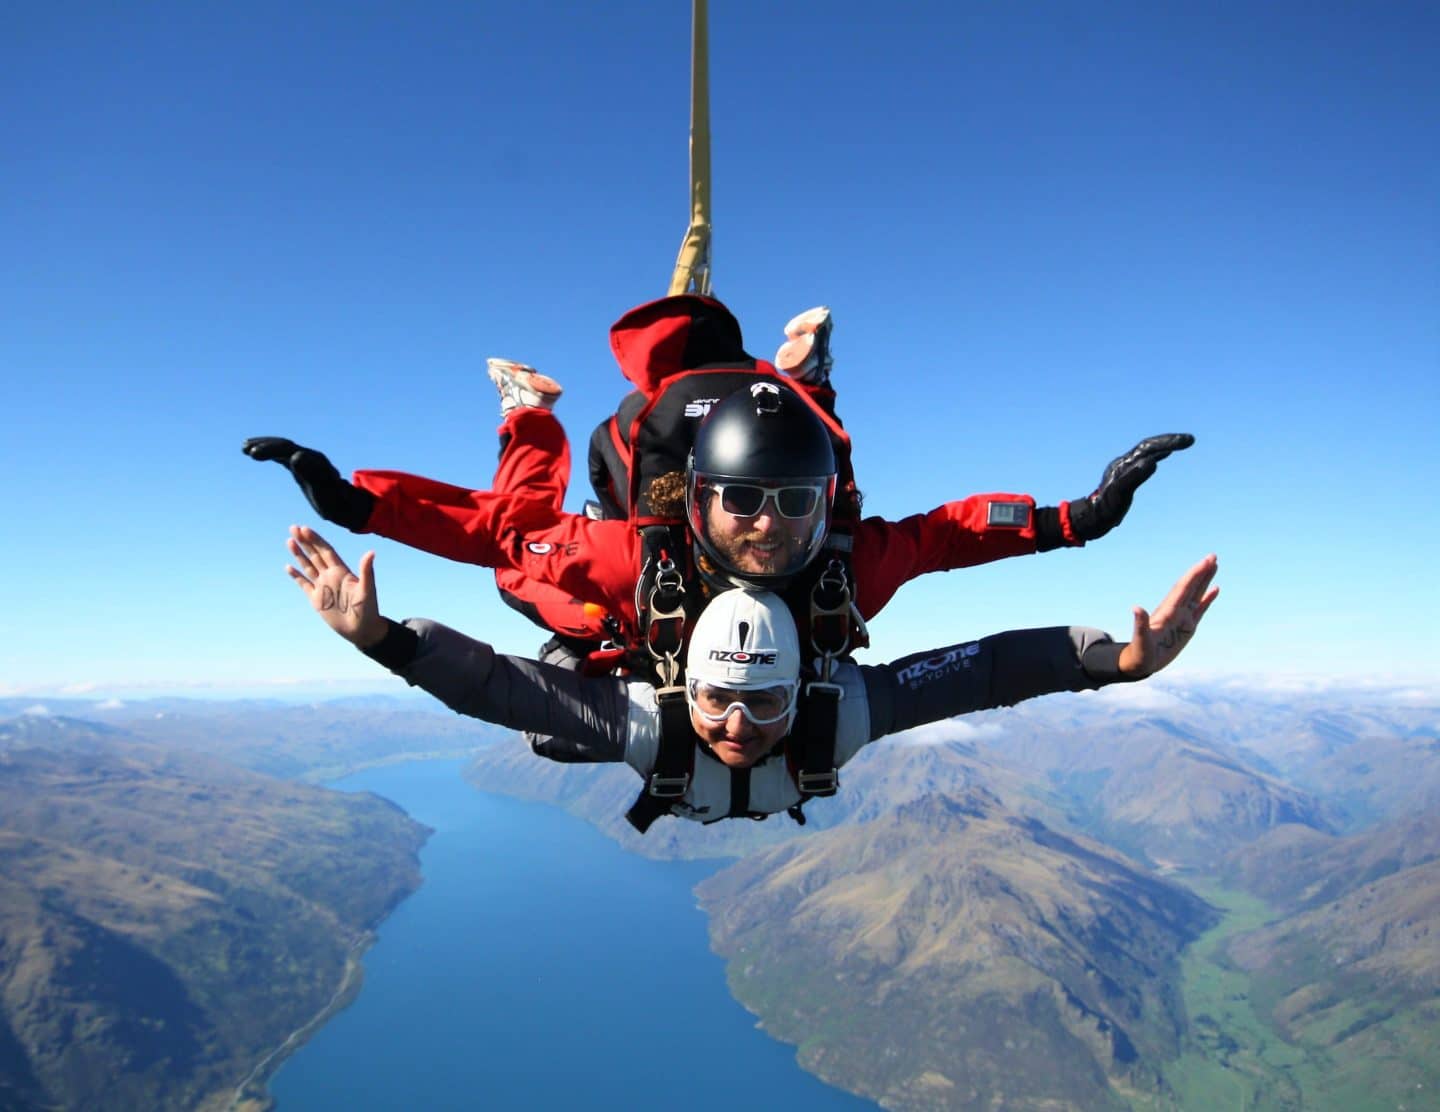 The challenge of living and travelling with Type 1 Diabetes, Nzone Skydive